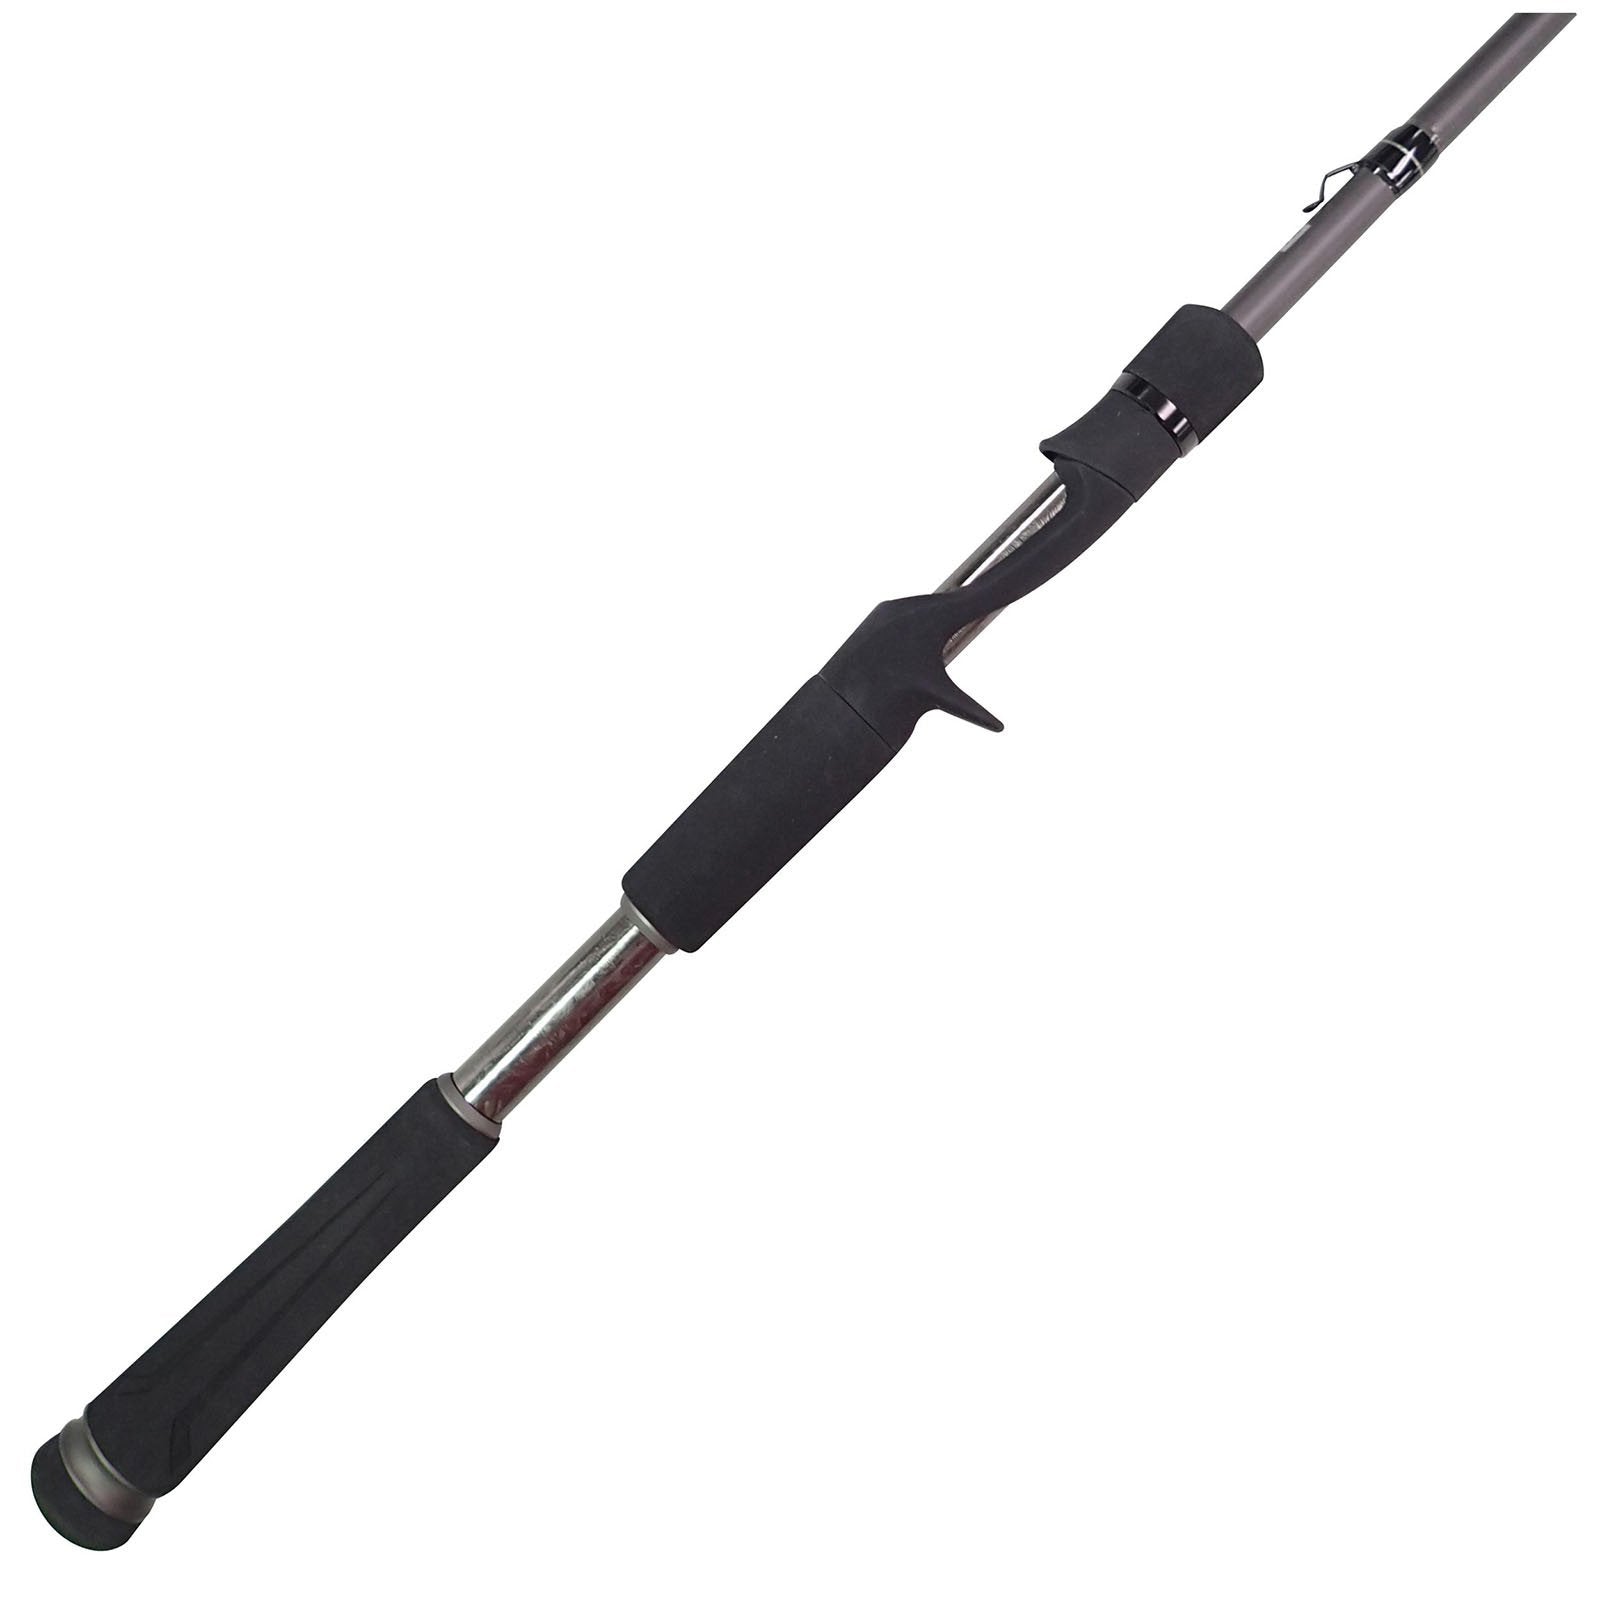 13 FISHING - FATE CHROME - CASTING RODS - Tackle Depot